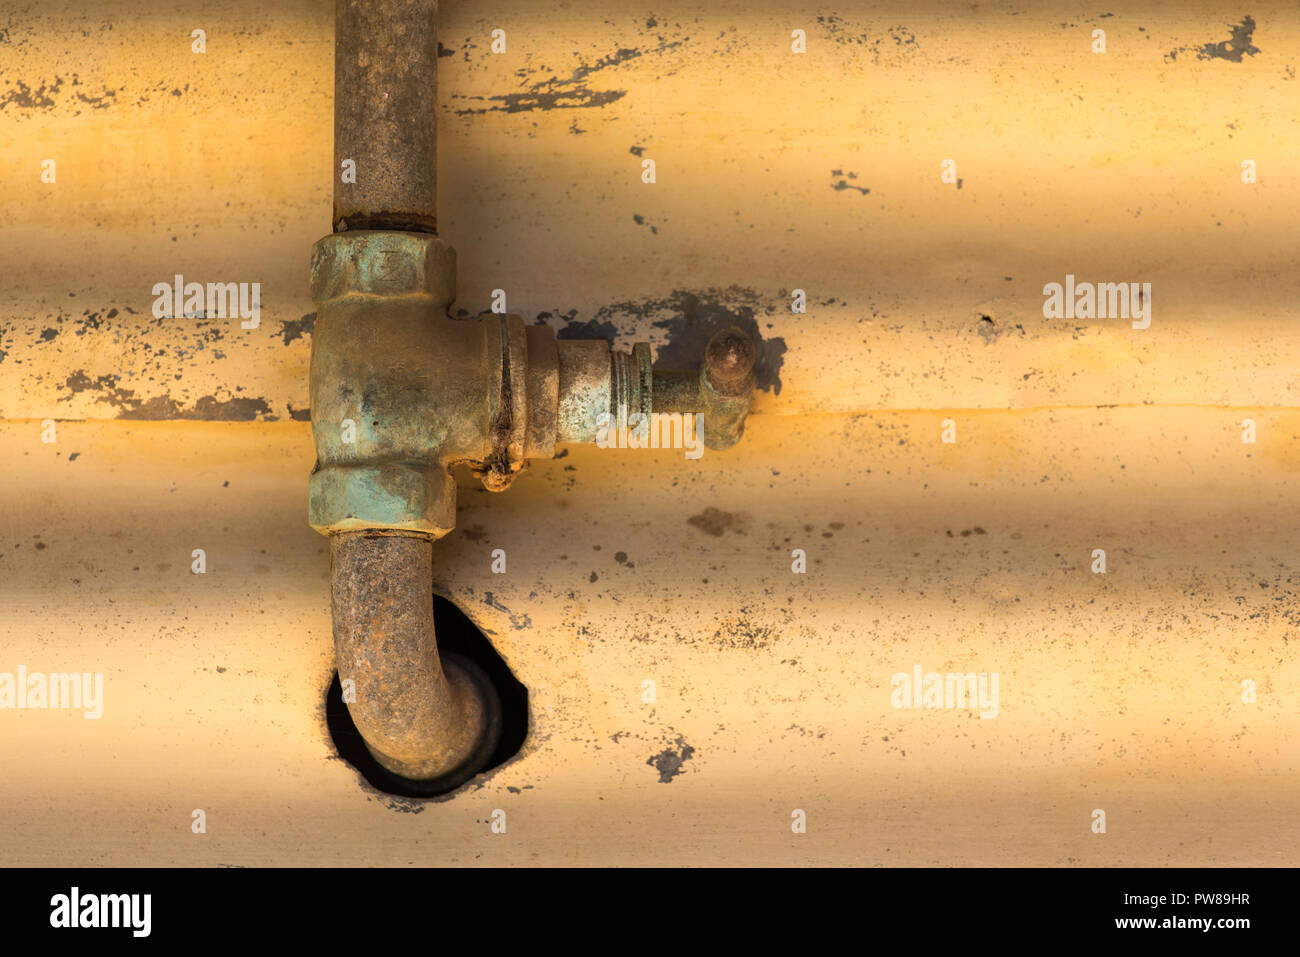 An old rusty pipe and tap running up and through a hole in a wall Stock Photo